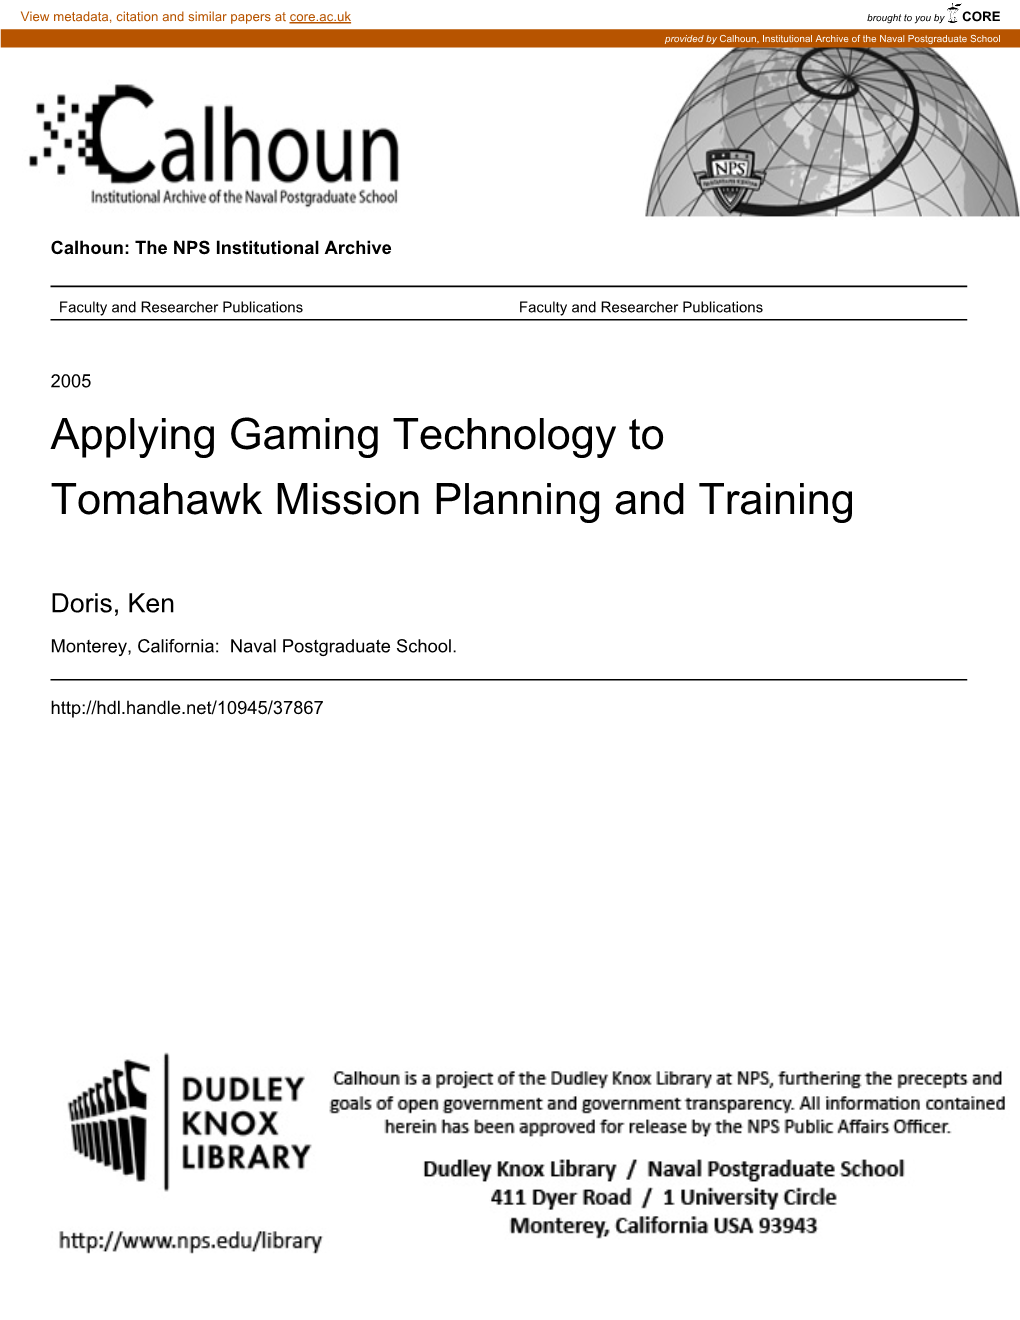 Applying Gaming Technology to Tomahawk Mission Planning and Training